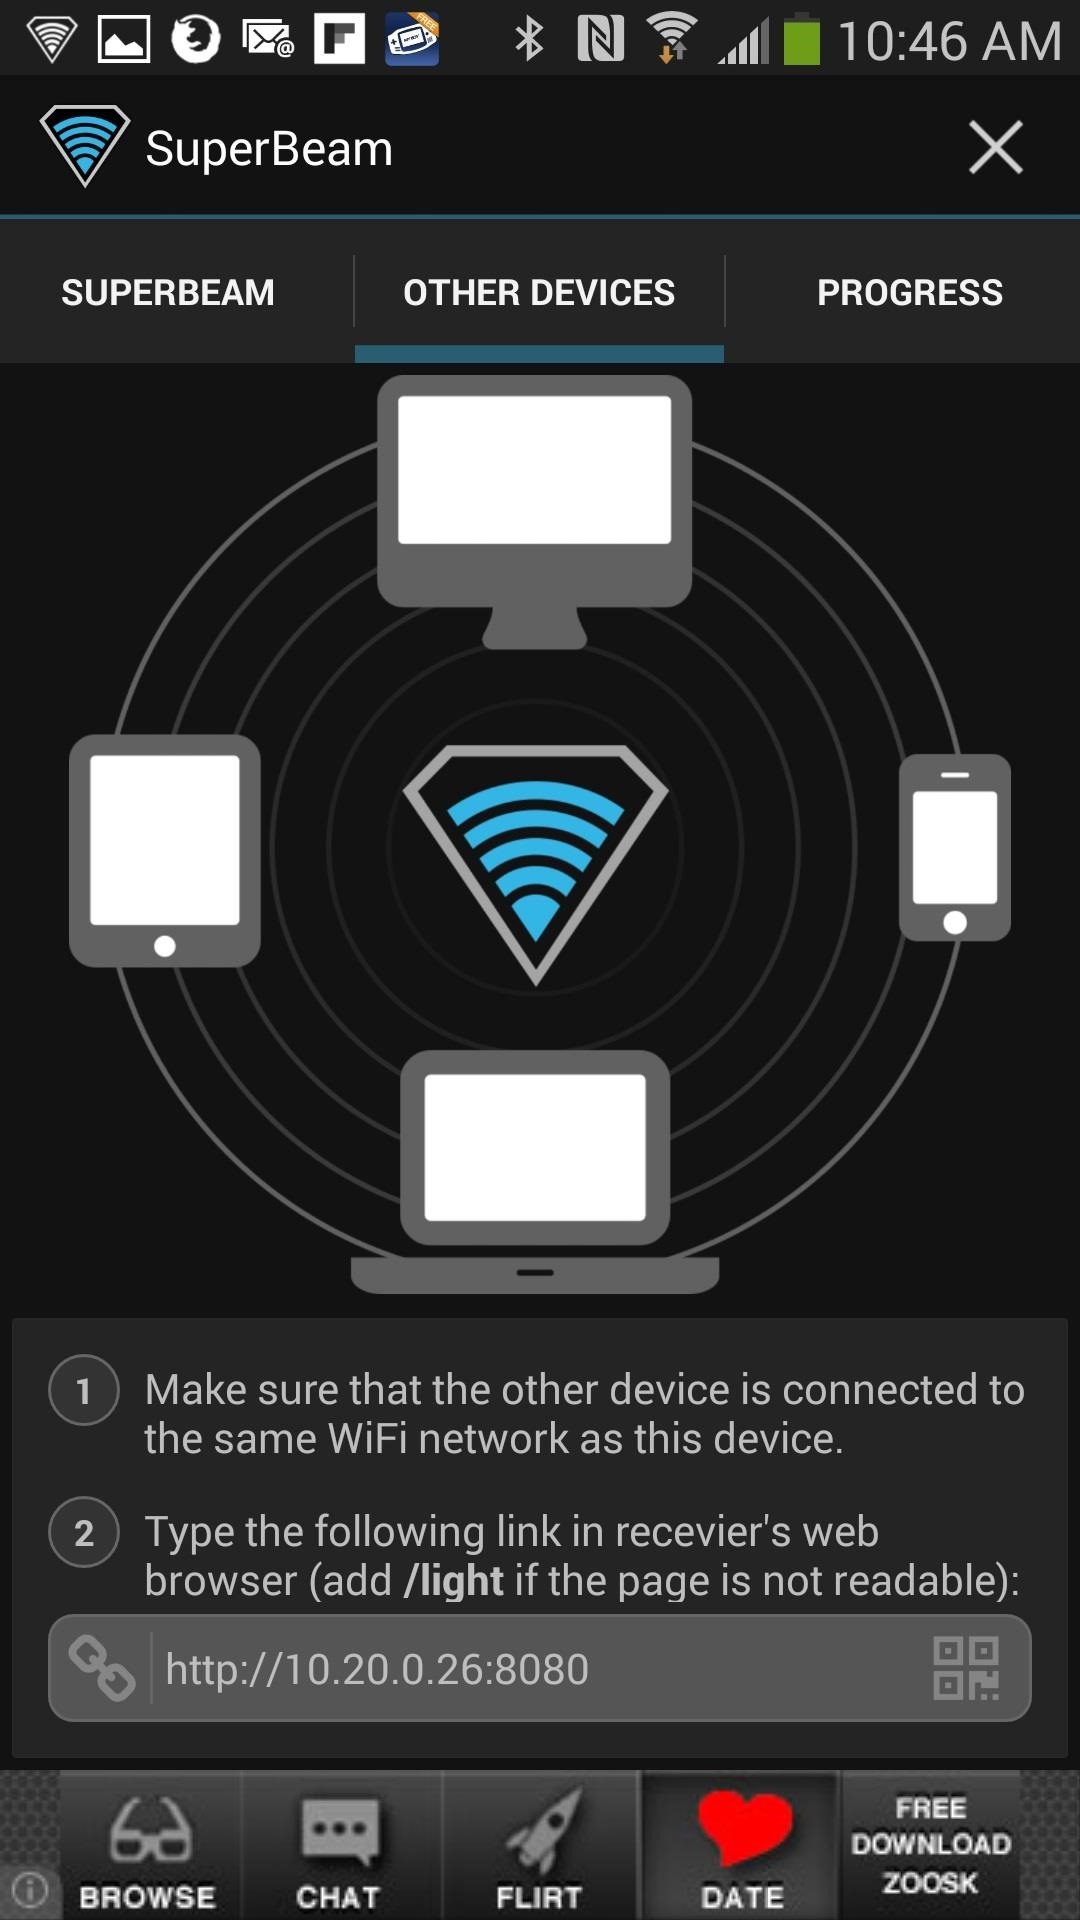 How to Quickly Share & Receive Large Files from Other Devices Without Using Wi-Fi